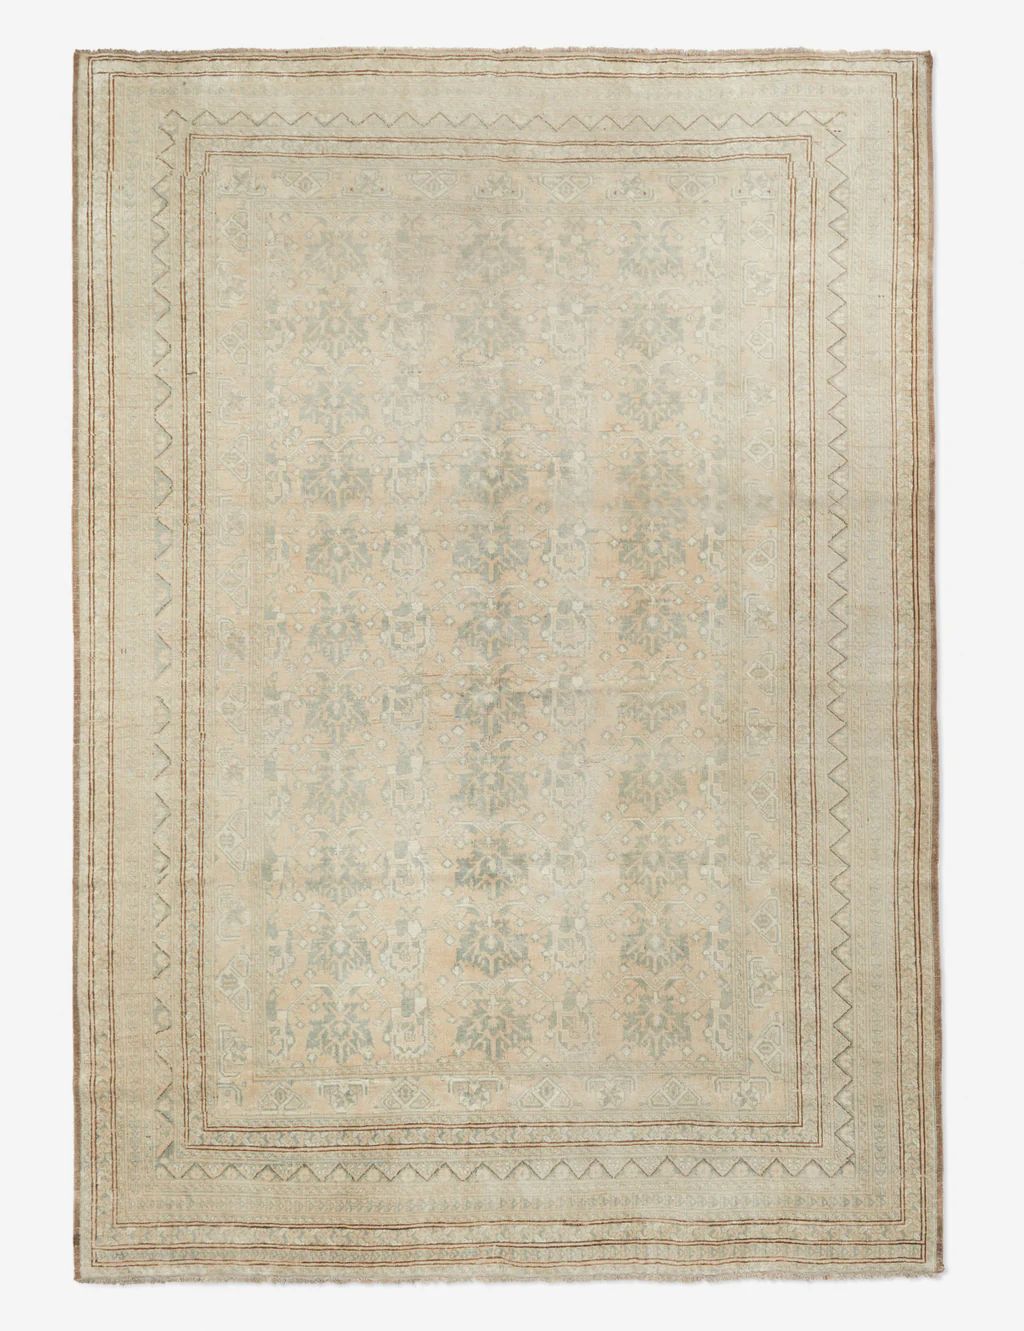 Vintage Persian Hand-Knotted Wool Rug No. 11, 6'6" x 9'4" | Lulu and Georgia 